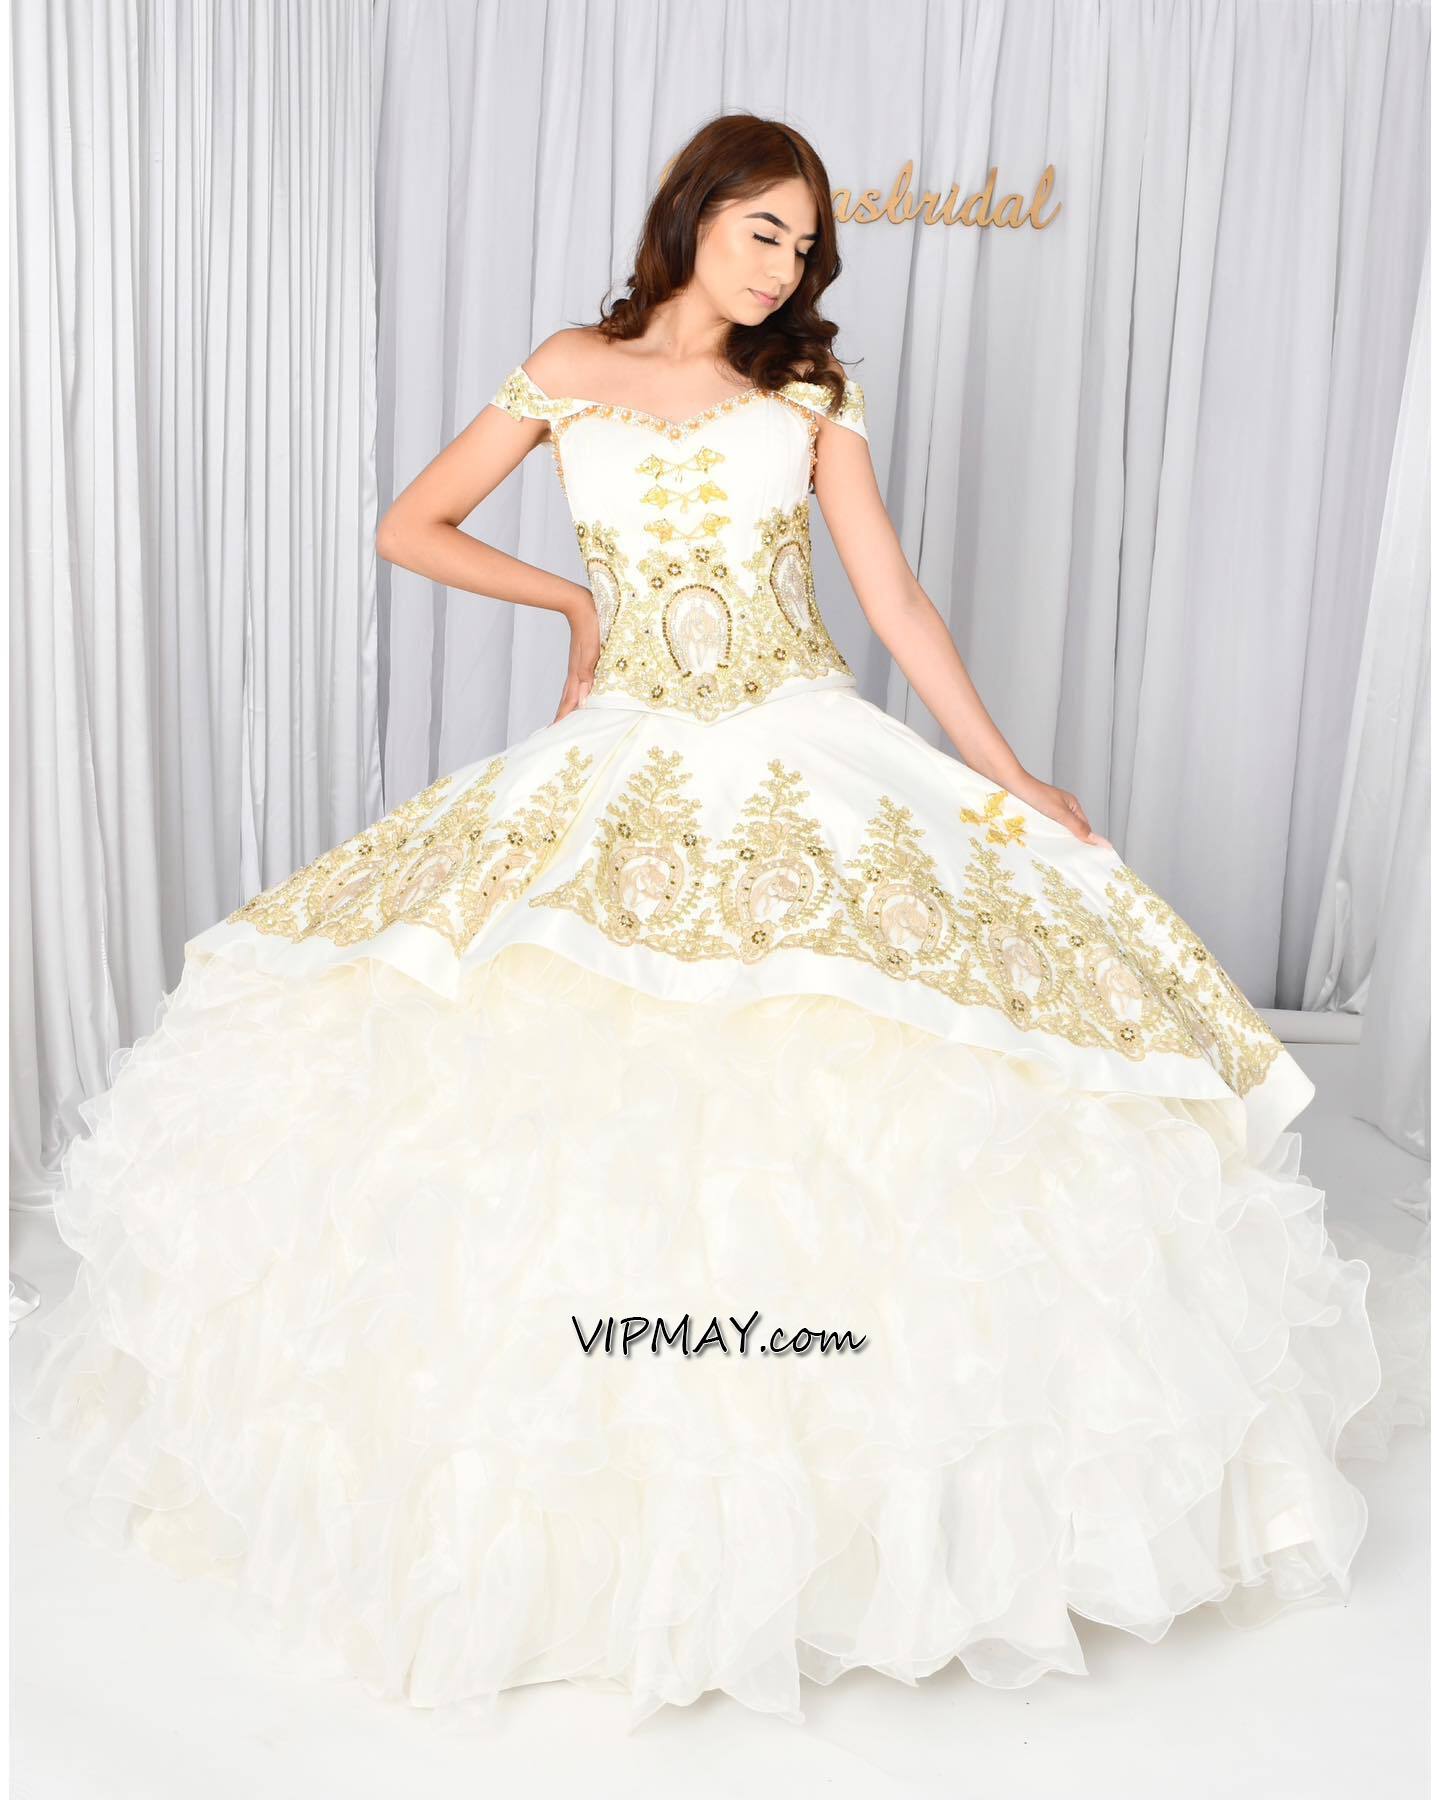 online cheap quinceanera dress,where to buy cheap quinceanera dress,cheap beautiful quinceanera dress,white and gold quinceanera dress,traditional mexican quinceanera dress,white quinceanera dress,quinceanera dress with horses,sweet sixteen dress with ruffles,quinceanera dress with ruffles,custom make your quinceanera dress,